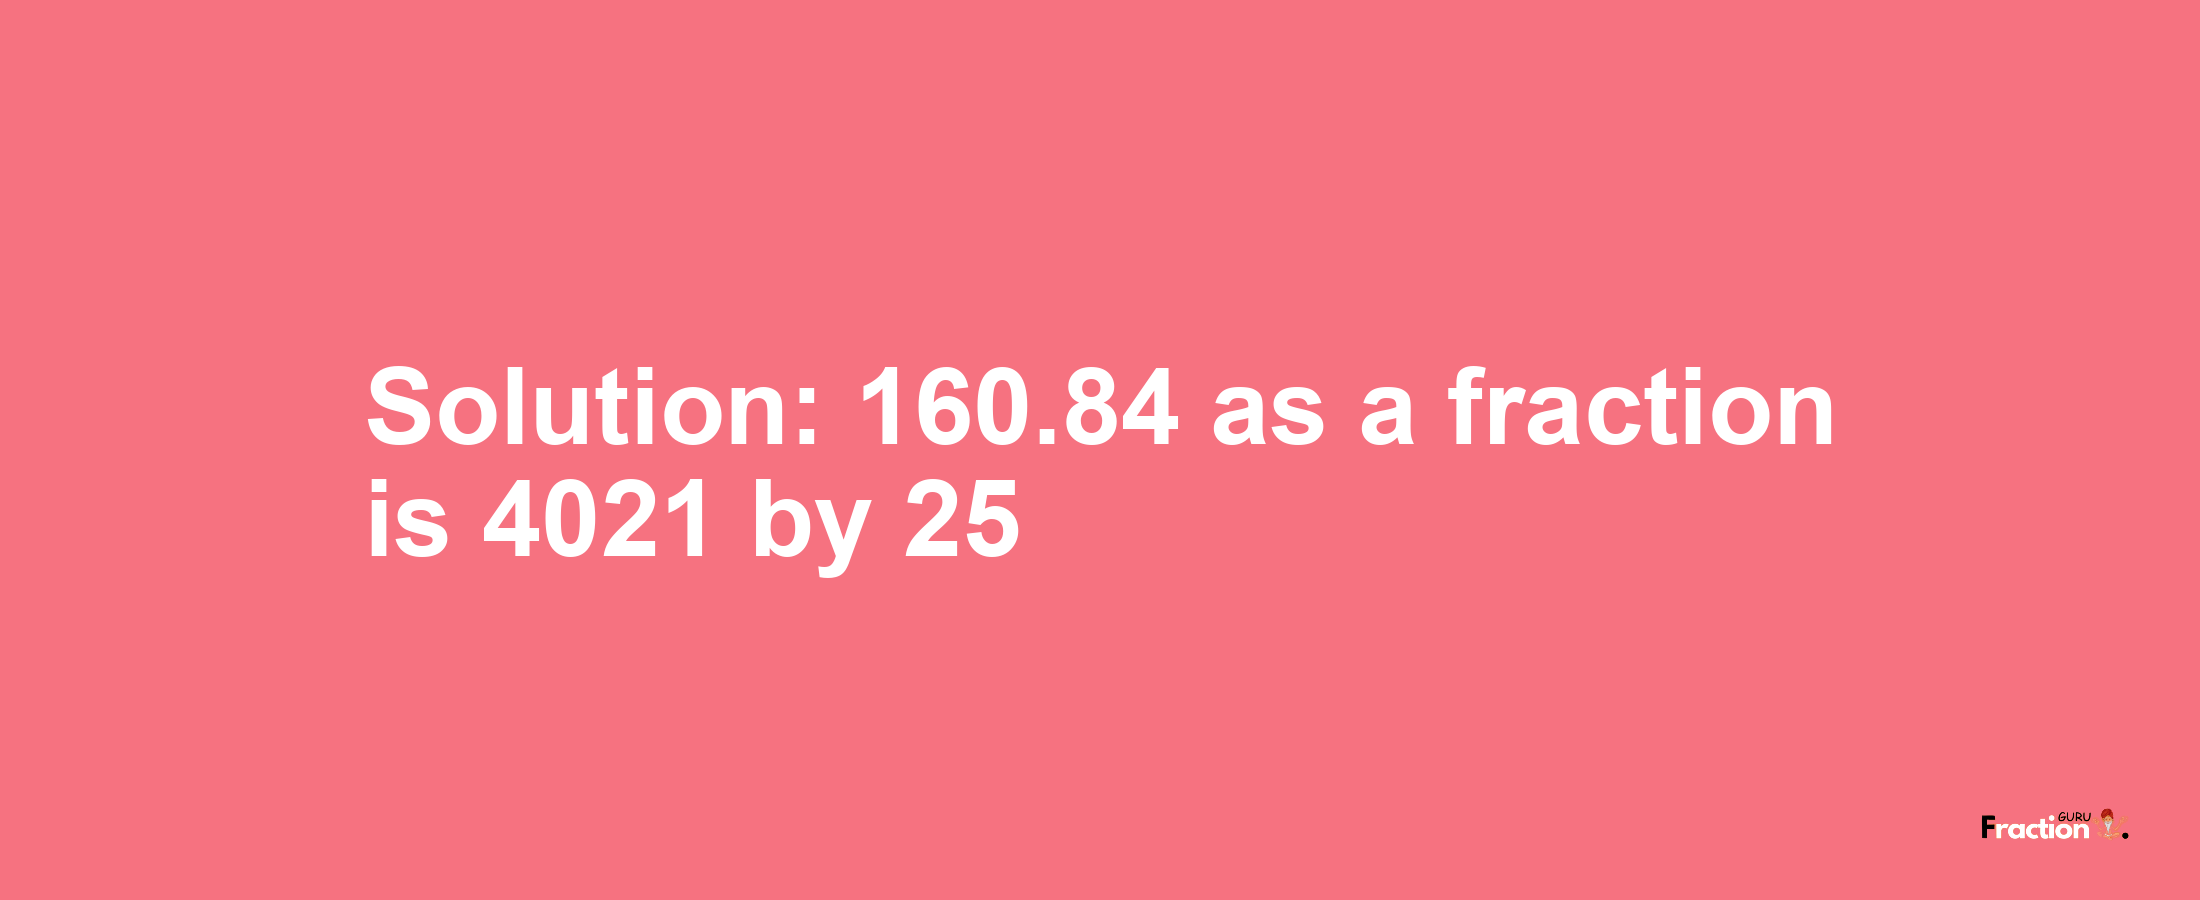 Solution:160.84 as a fraction is 4021/25